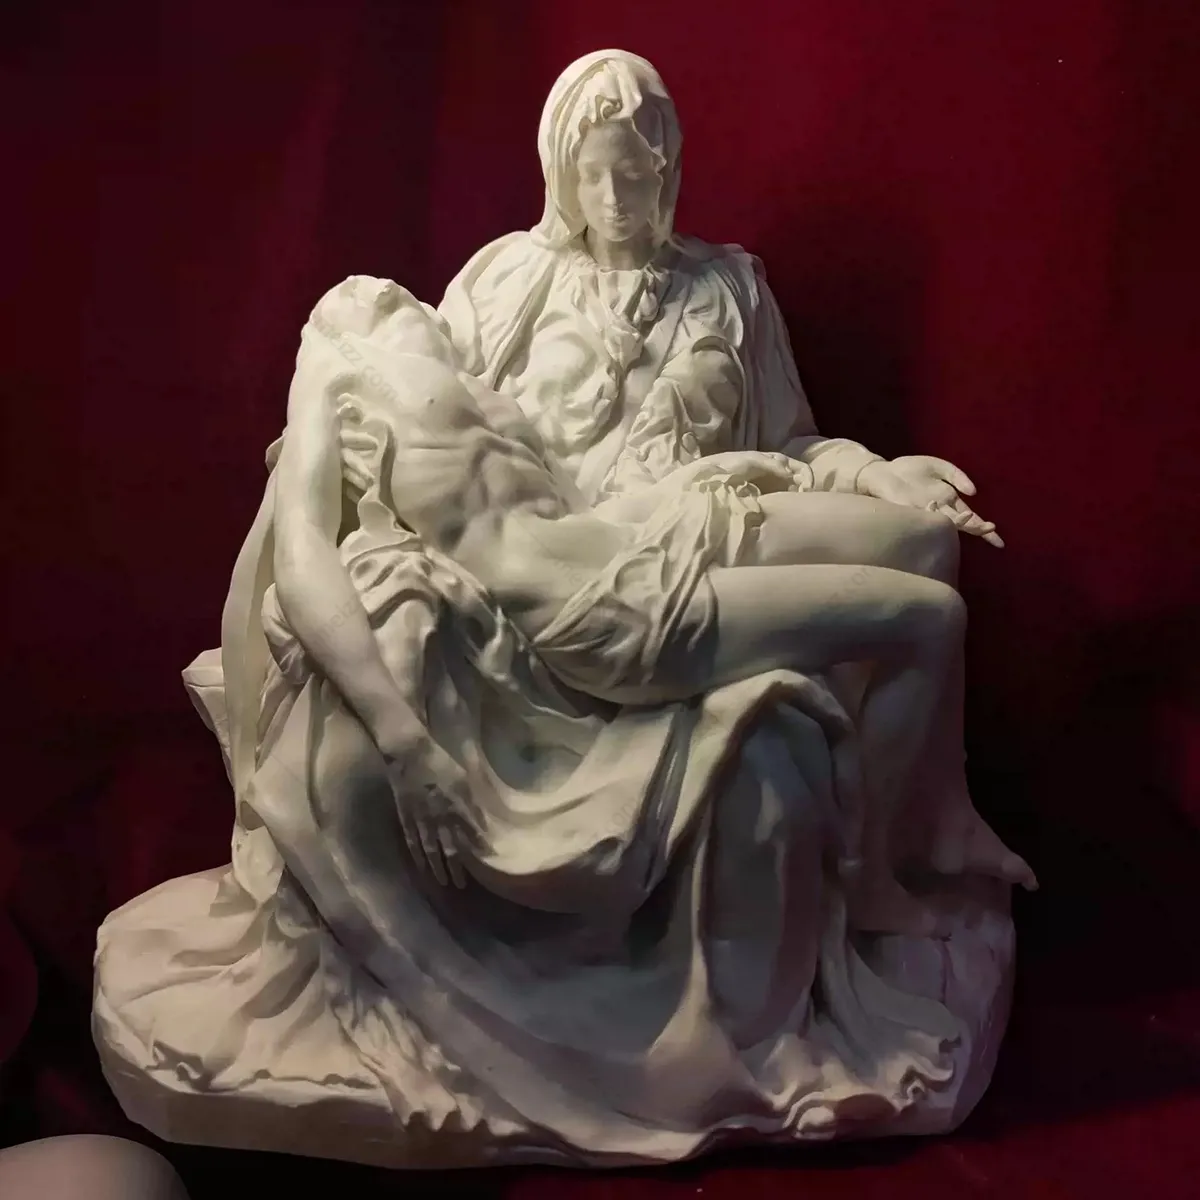 mother mary holding jesus statue